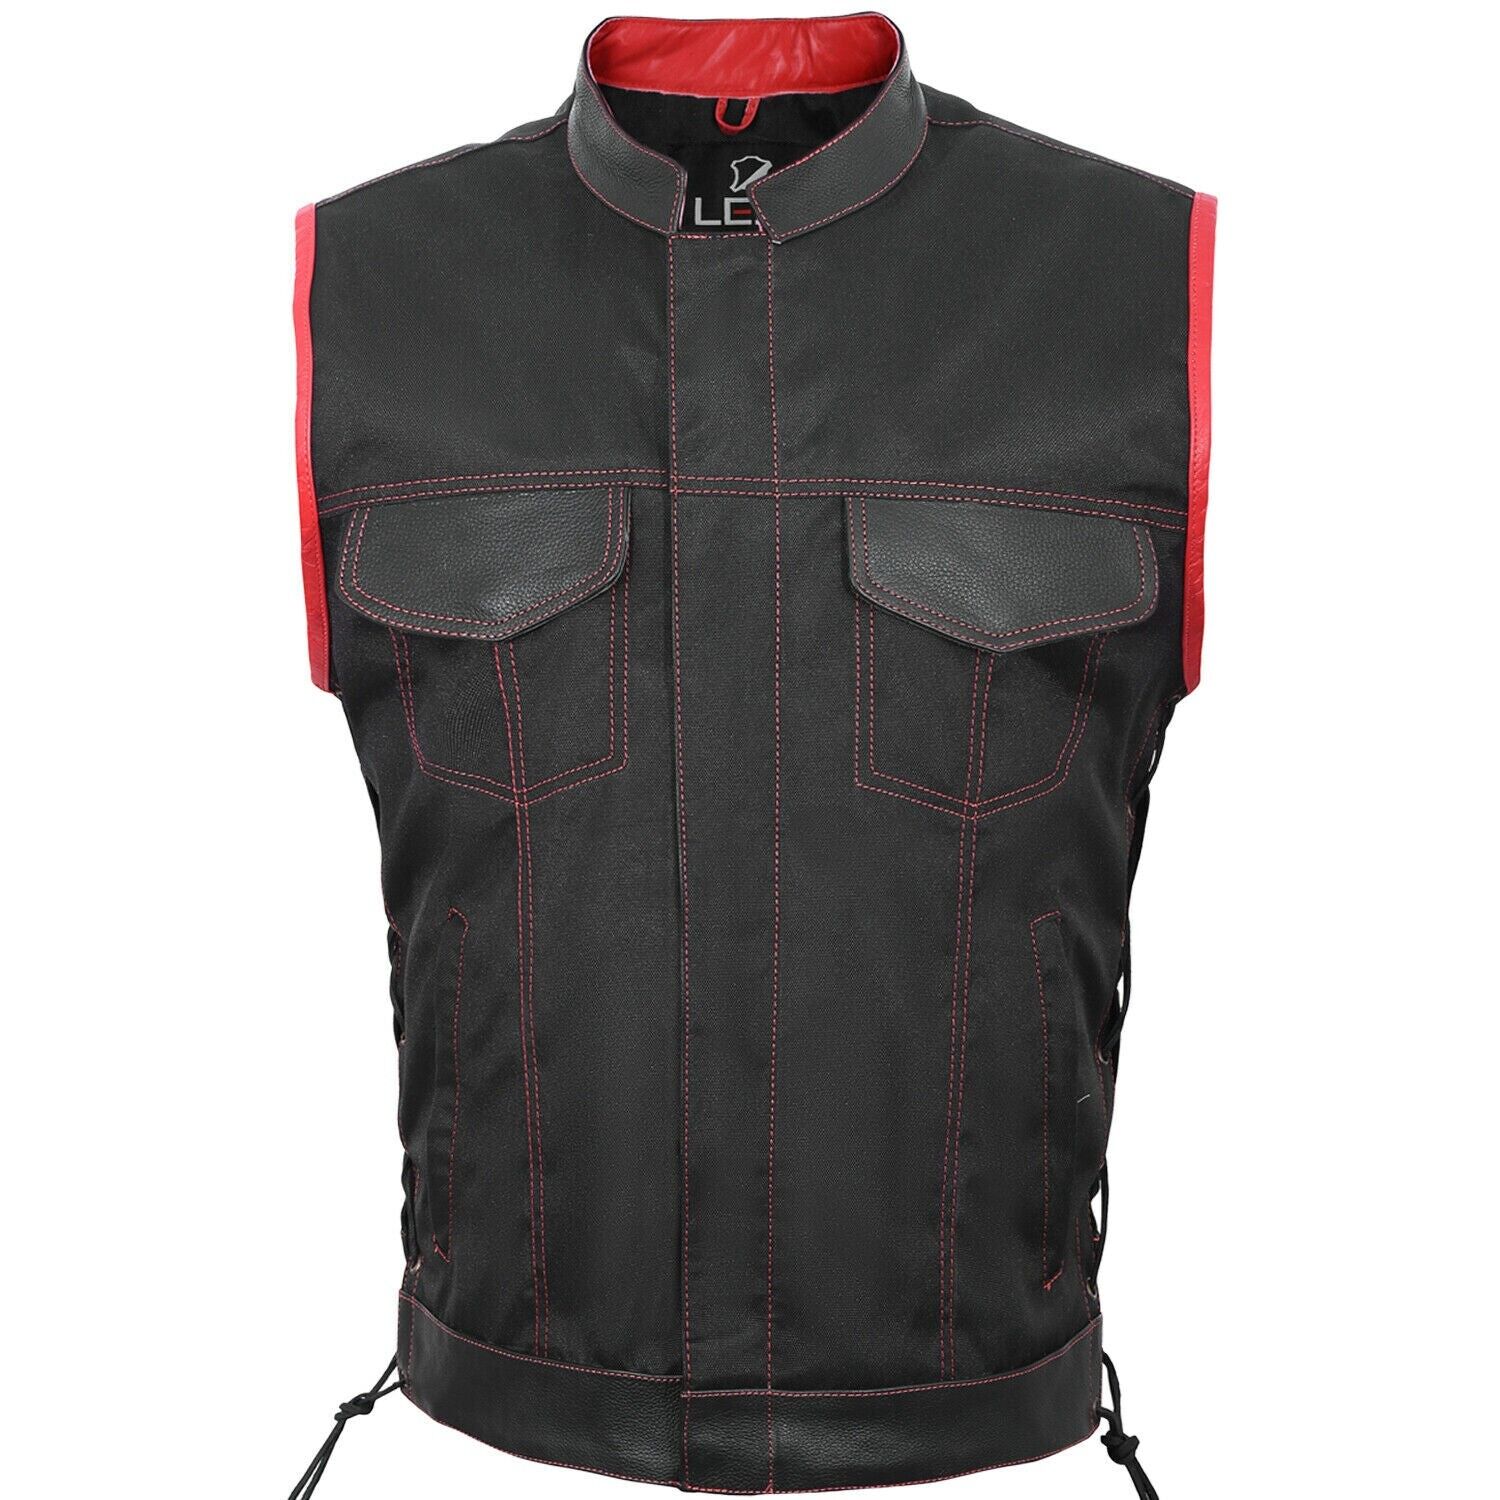 Ankorstore x Lesa Collection - Men's SOA style Lace up fabric Biker  Waistcoat/Vest red Real Leather Trimming UK - S - Stand up Collar with Side  Laces